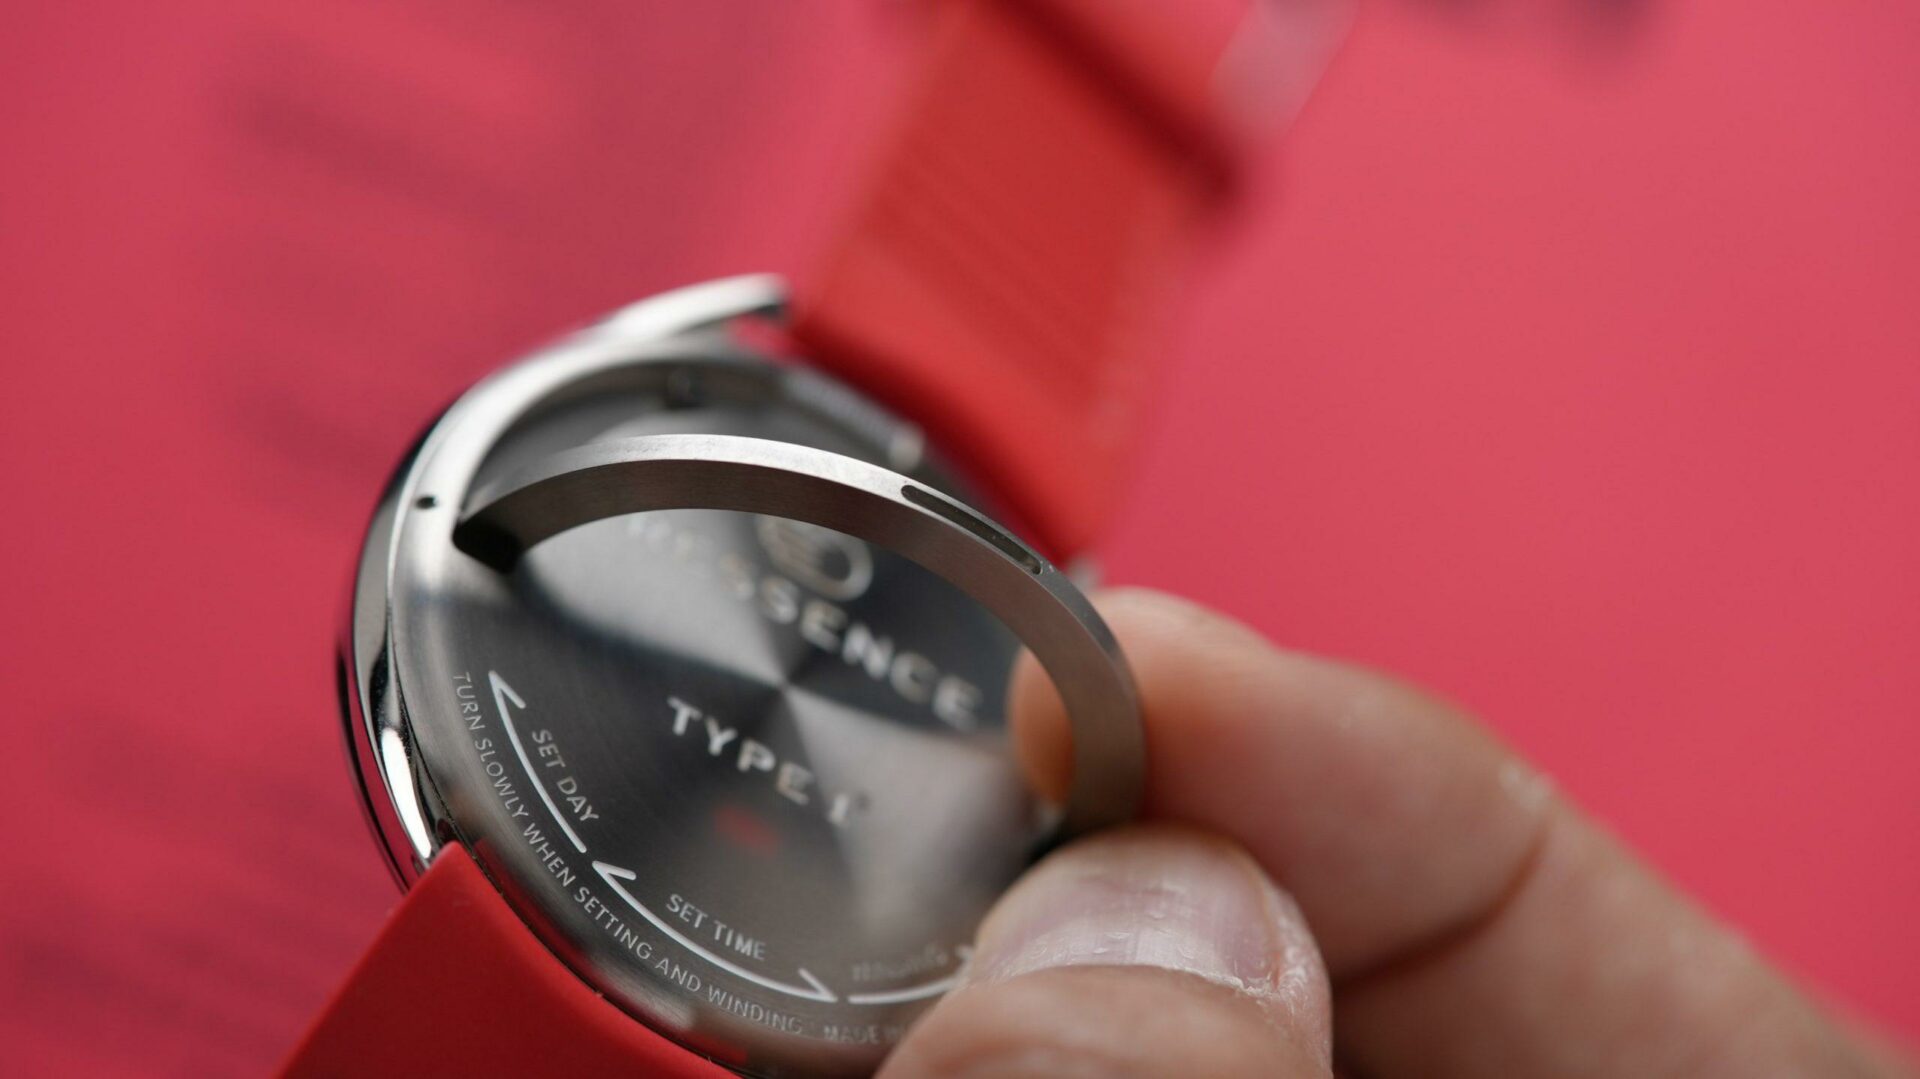 The back side of the Ressence Type 1 Slim Red being adjusted and held in hand closeup with red background.